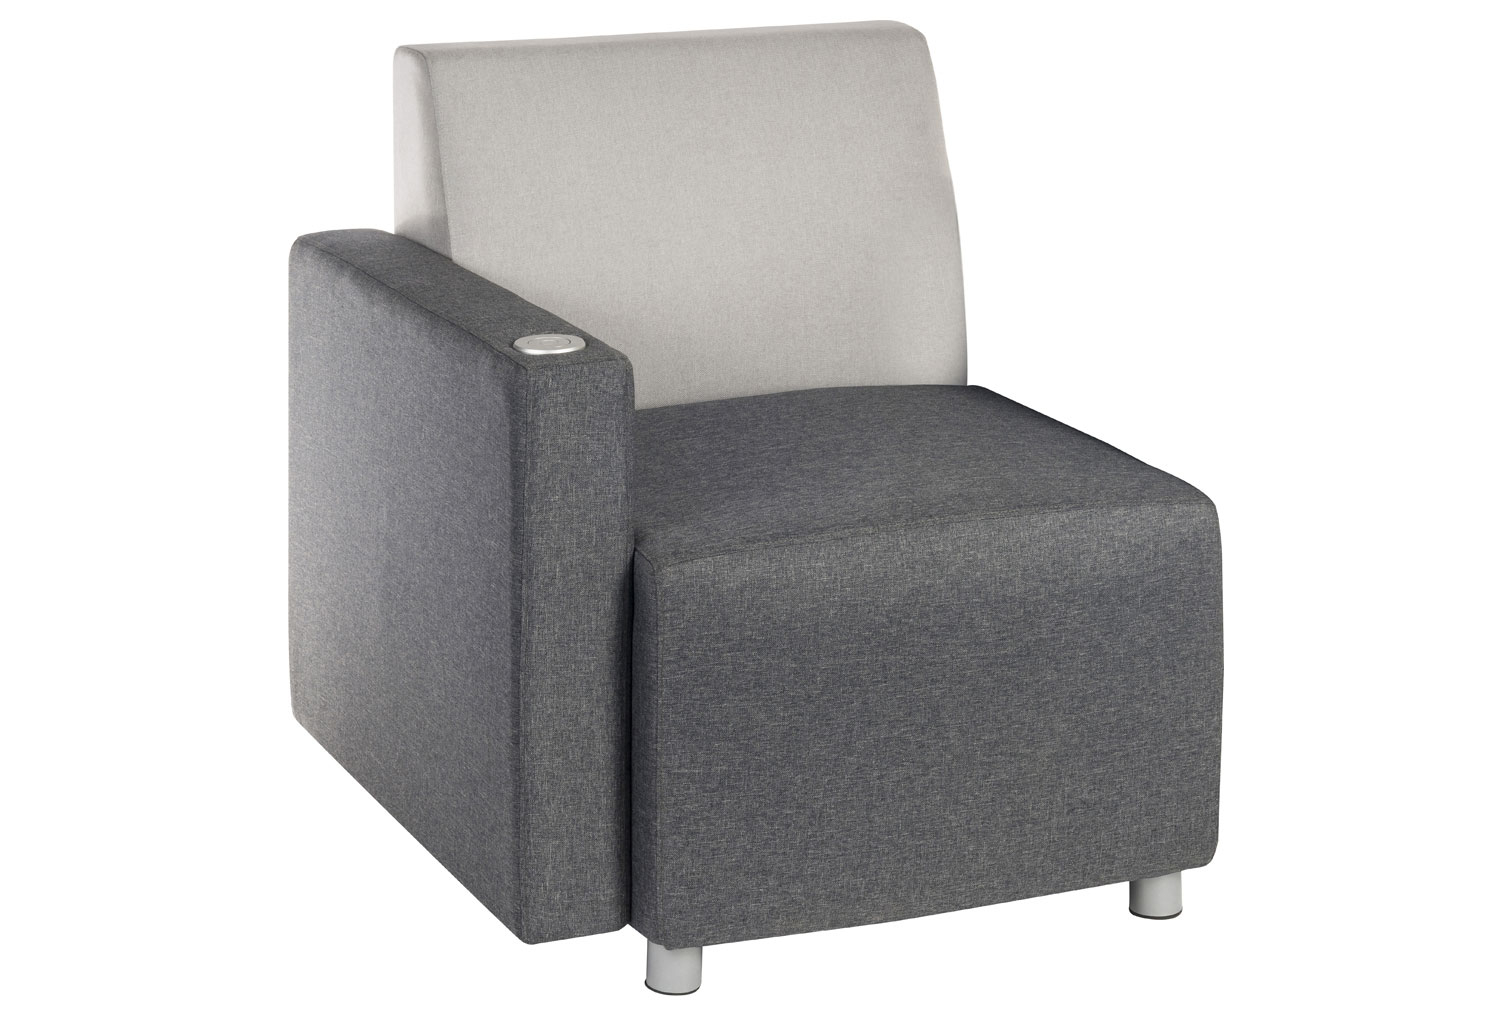 Geometry Modular Reception Seating, Chair With Right USB Arm